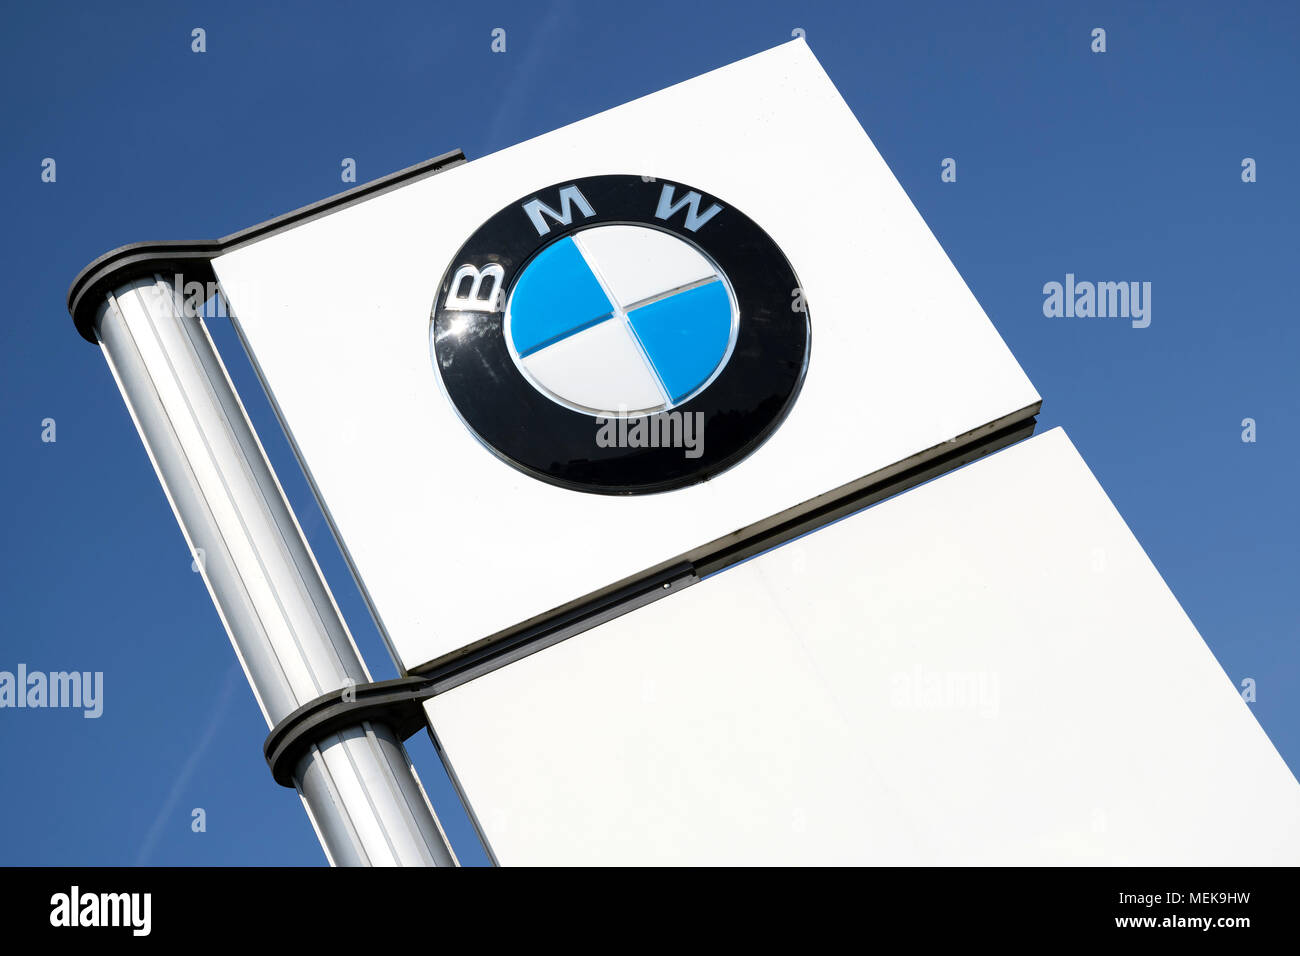 BMW dealership sign against blue sky. BMW is one of the best-selling luxury automakers in the world. Stock Photo